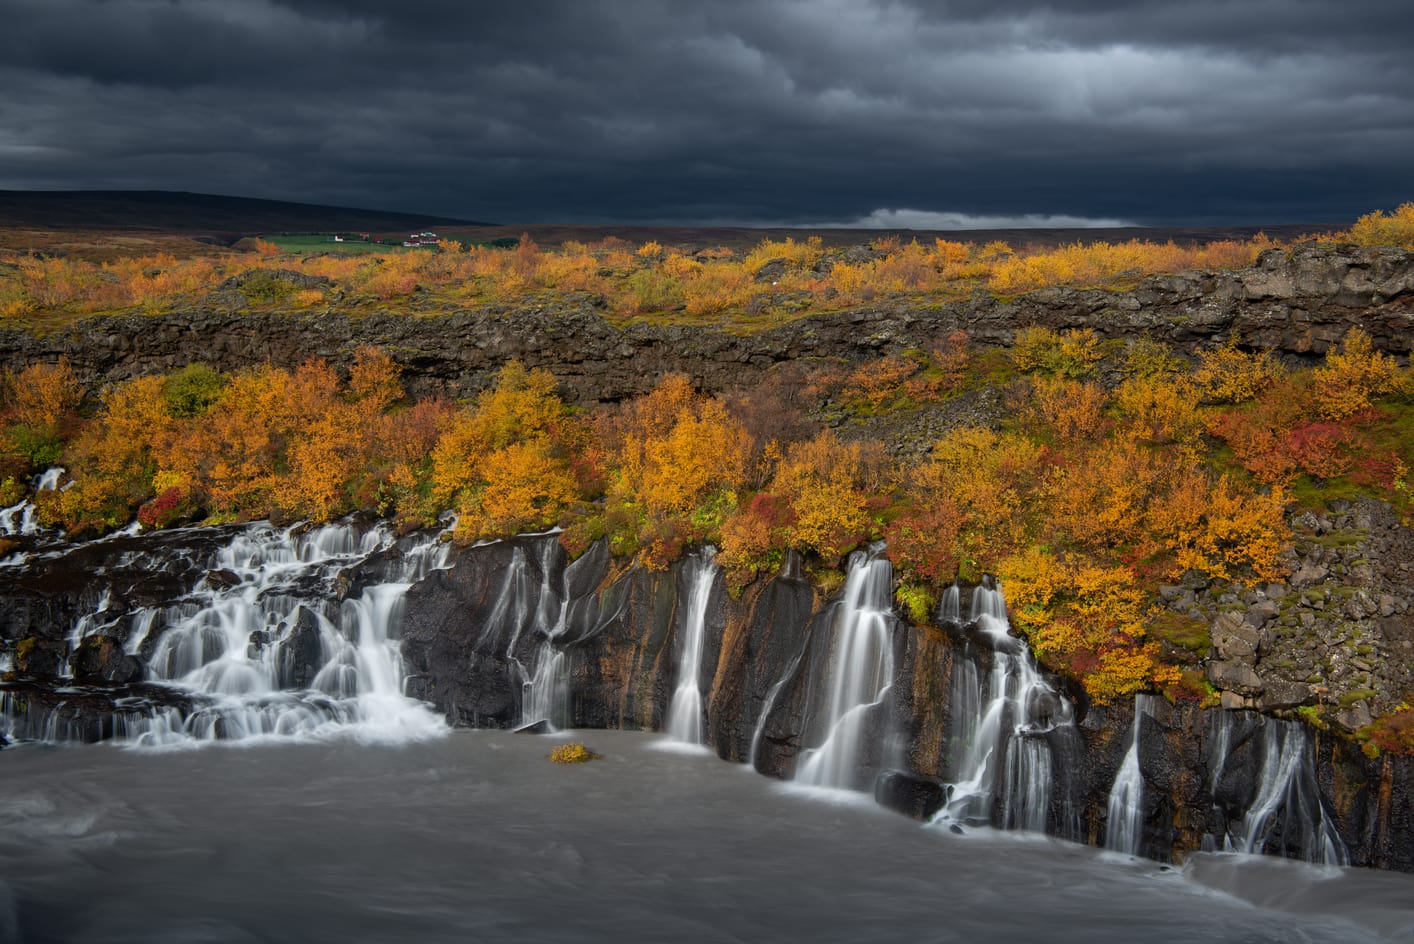 Hraunfossar, the best pictures of waterfalls in Iceland